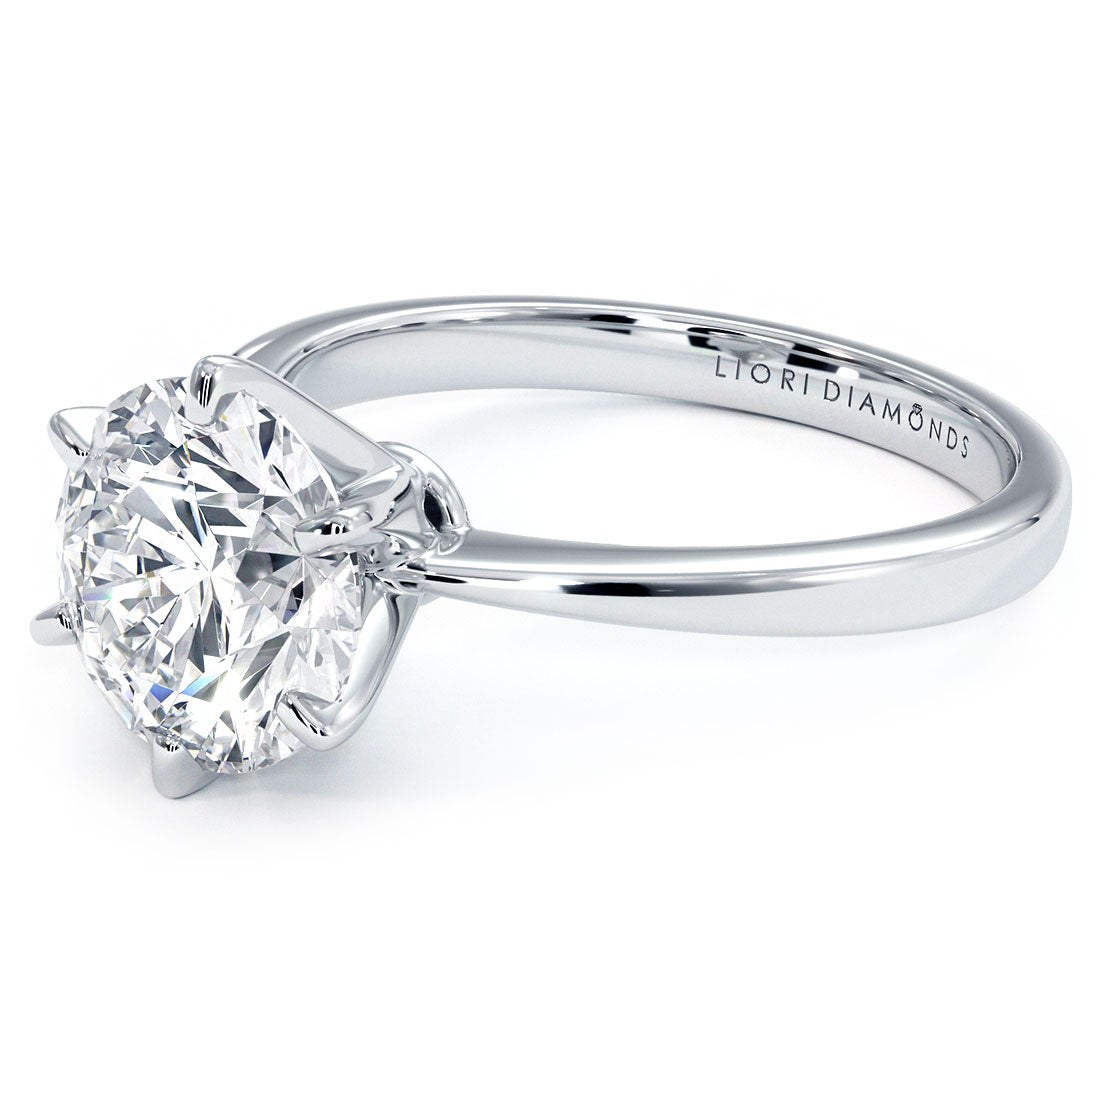 2.00ct Round Brilliant Petite Tapered 6 Prong Solitaire Diamond Engagement Ring Setting in Platinum